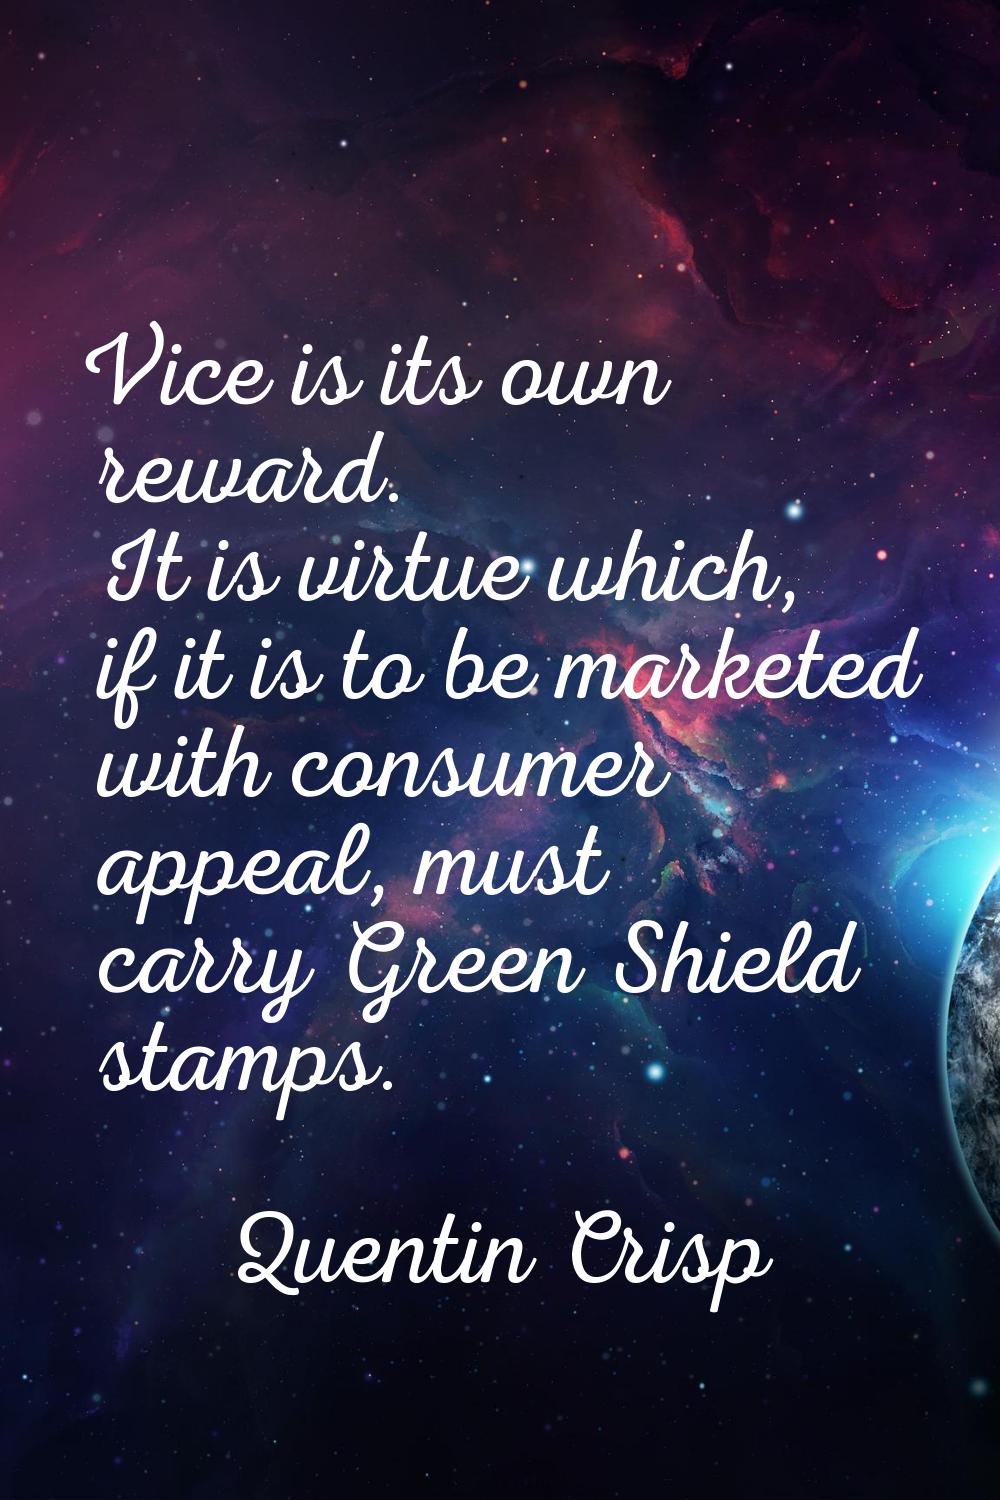 Vice is its own reward. It is virtue which, if it is to be marketed with consumer appeal, must carr